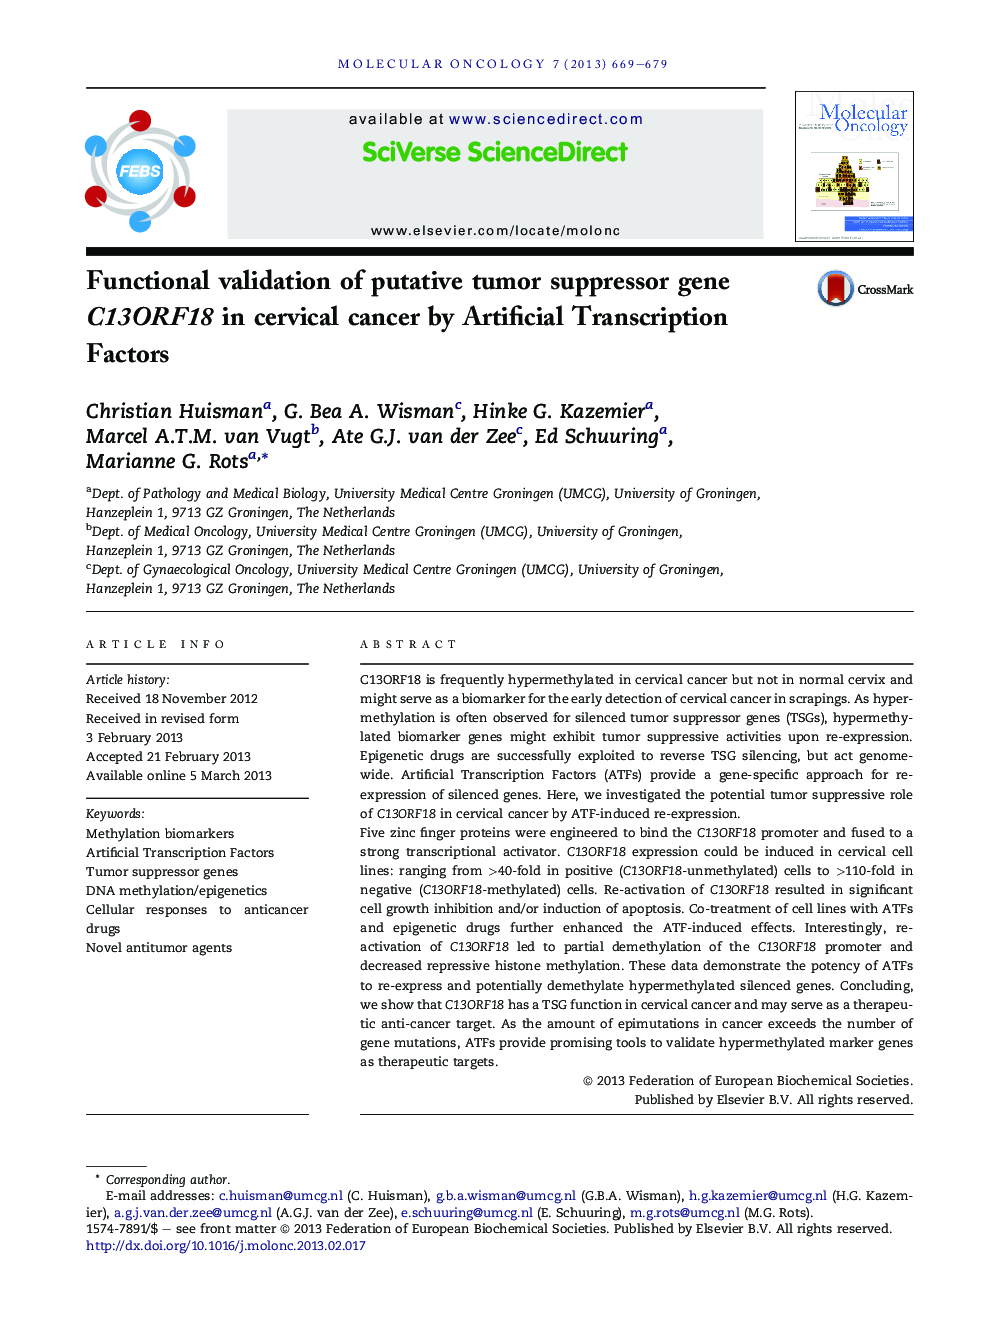 Functional validation of putative tumor suppressor gene C13ORF18 in cervical cancer by Artificial Transcription Factors